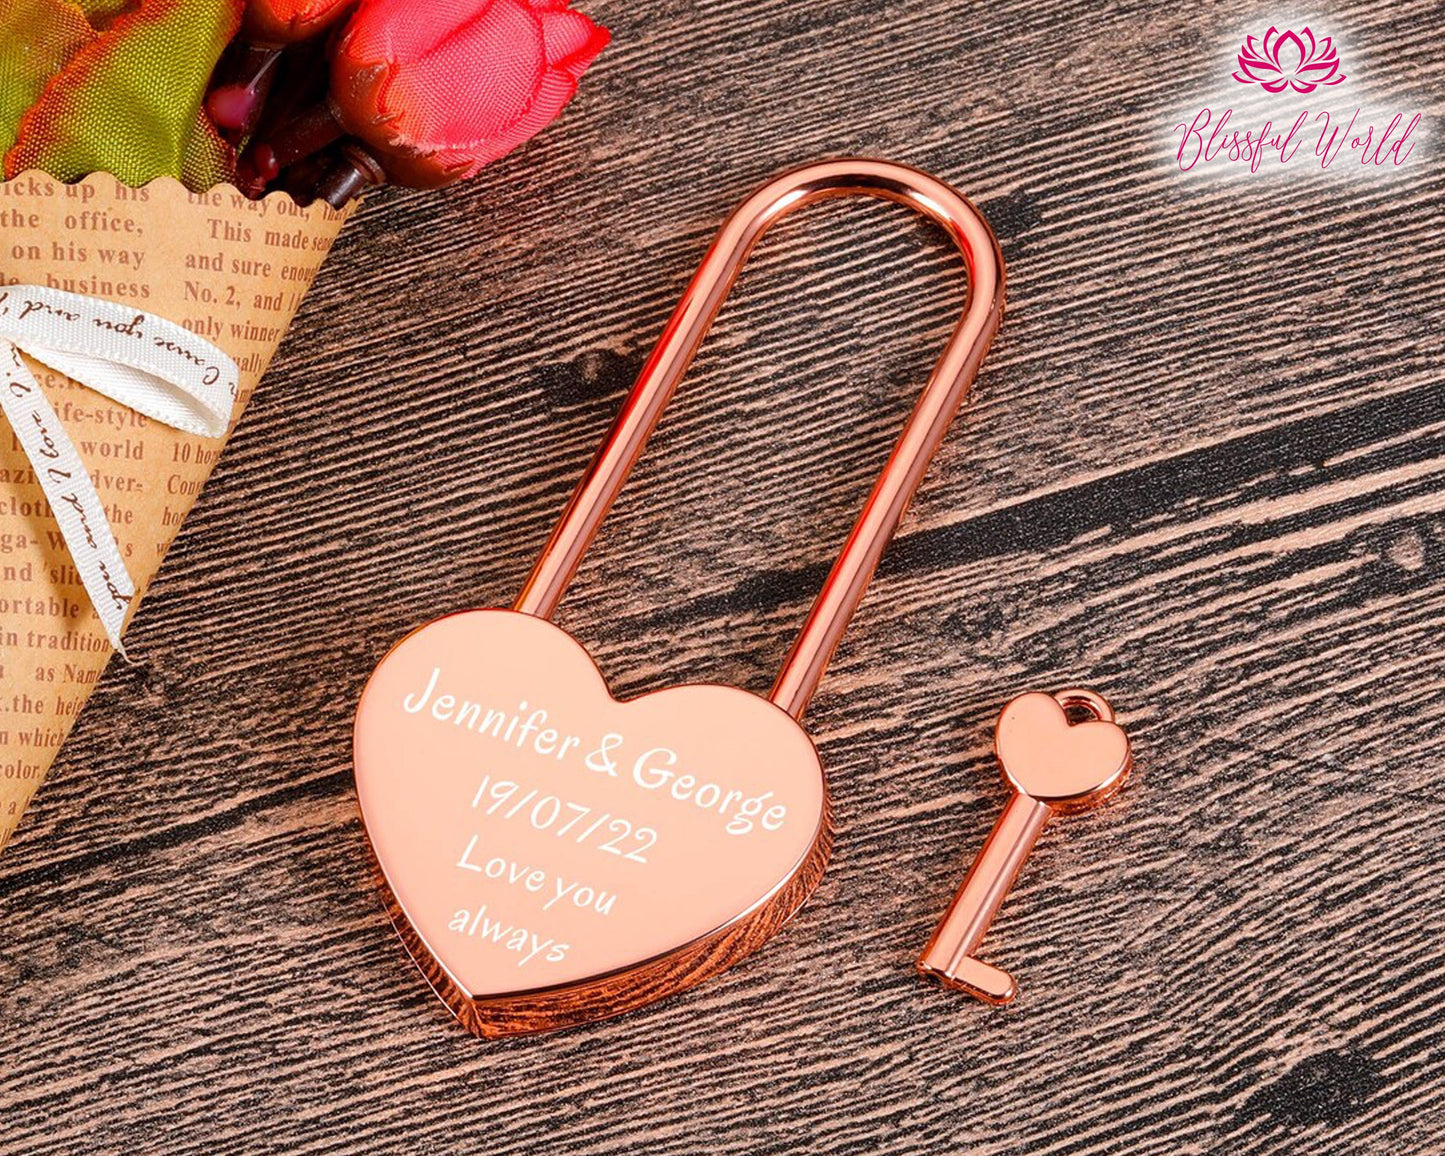 Customized Heart Padlock, Personalized Engraved Padlock, Love Lock, Engraved Lock, Padlock with Key, Engagement Gift, Anniversary Gift.